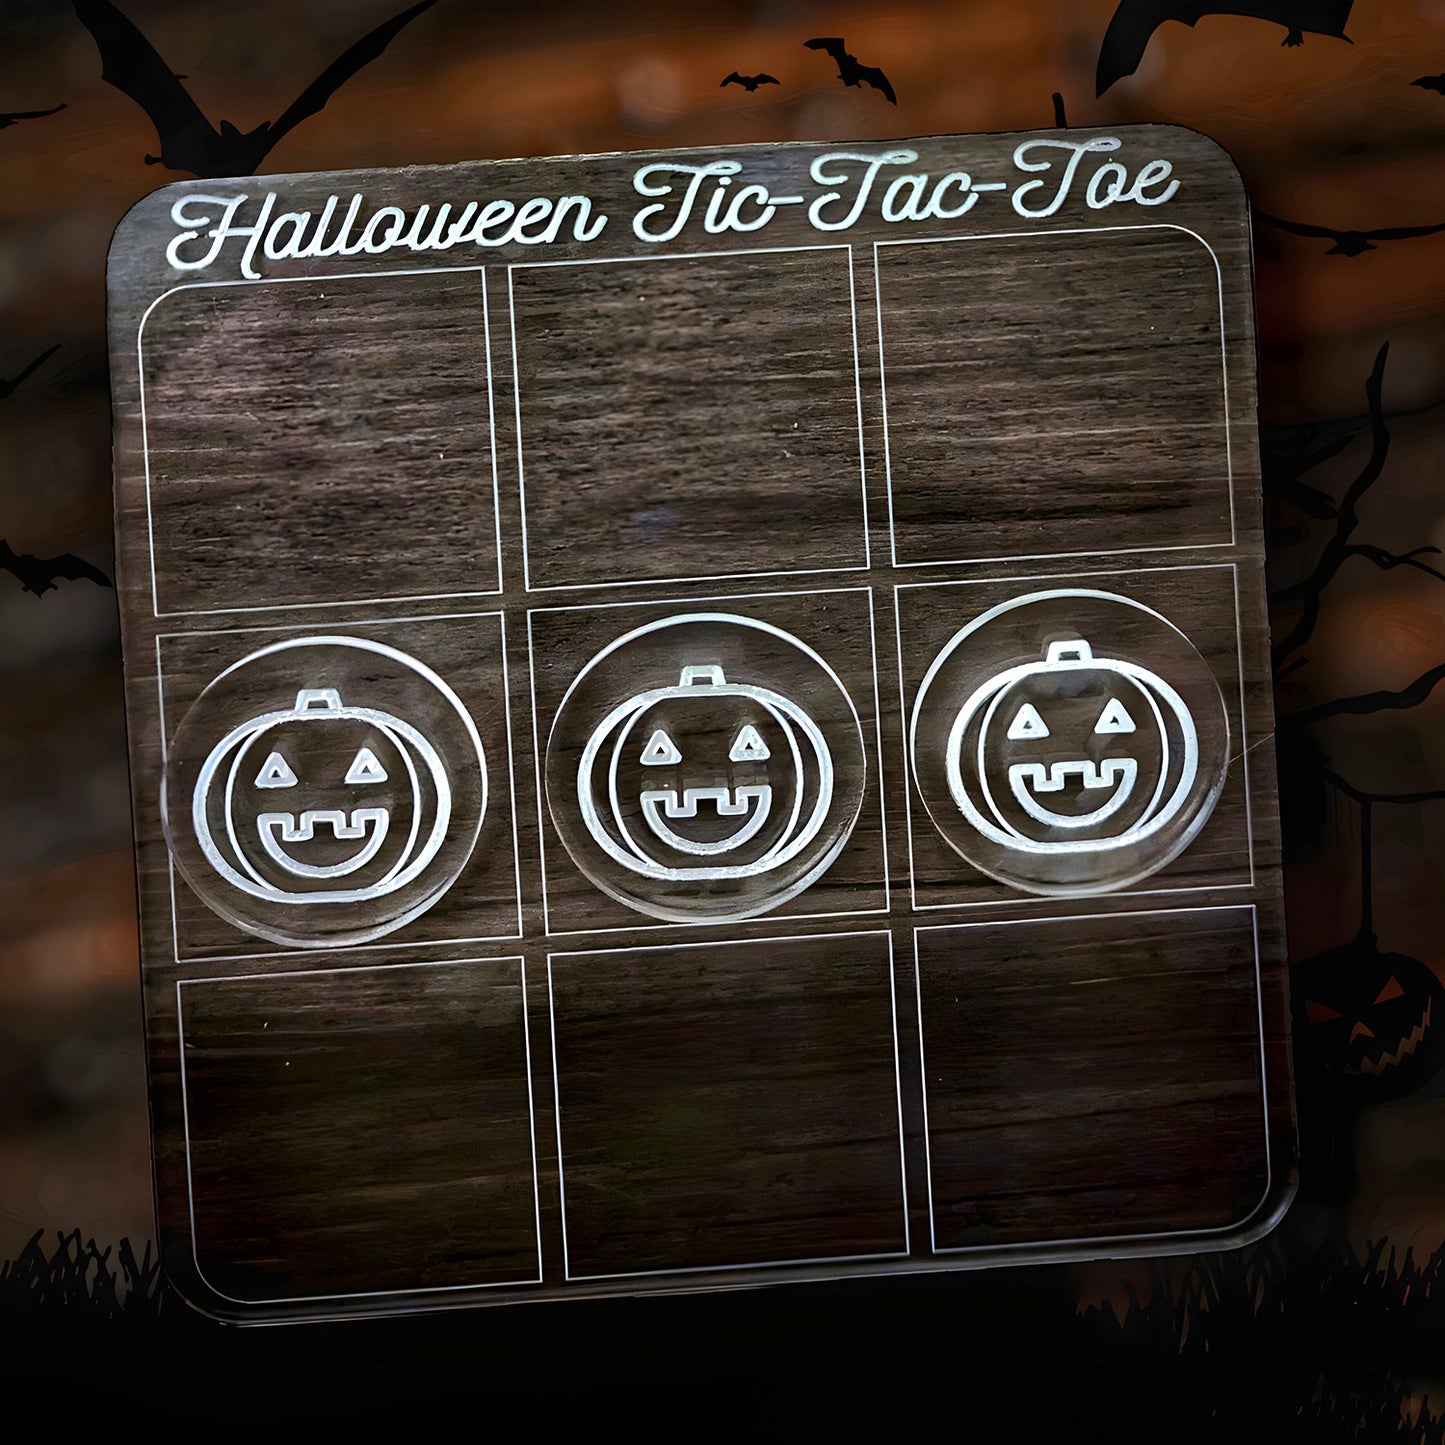 Halloween Prize Candy Alternative Tic Tac Toe Game With Ghost, Bat, Pumpkin, or Candy